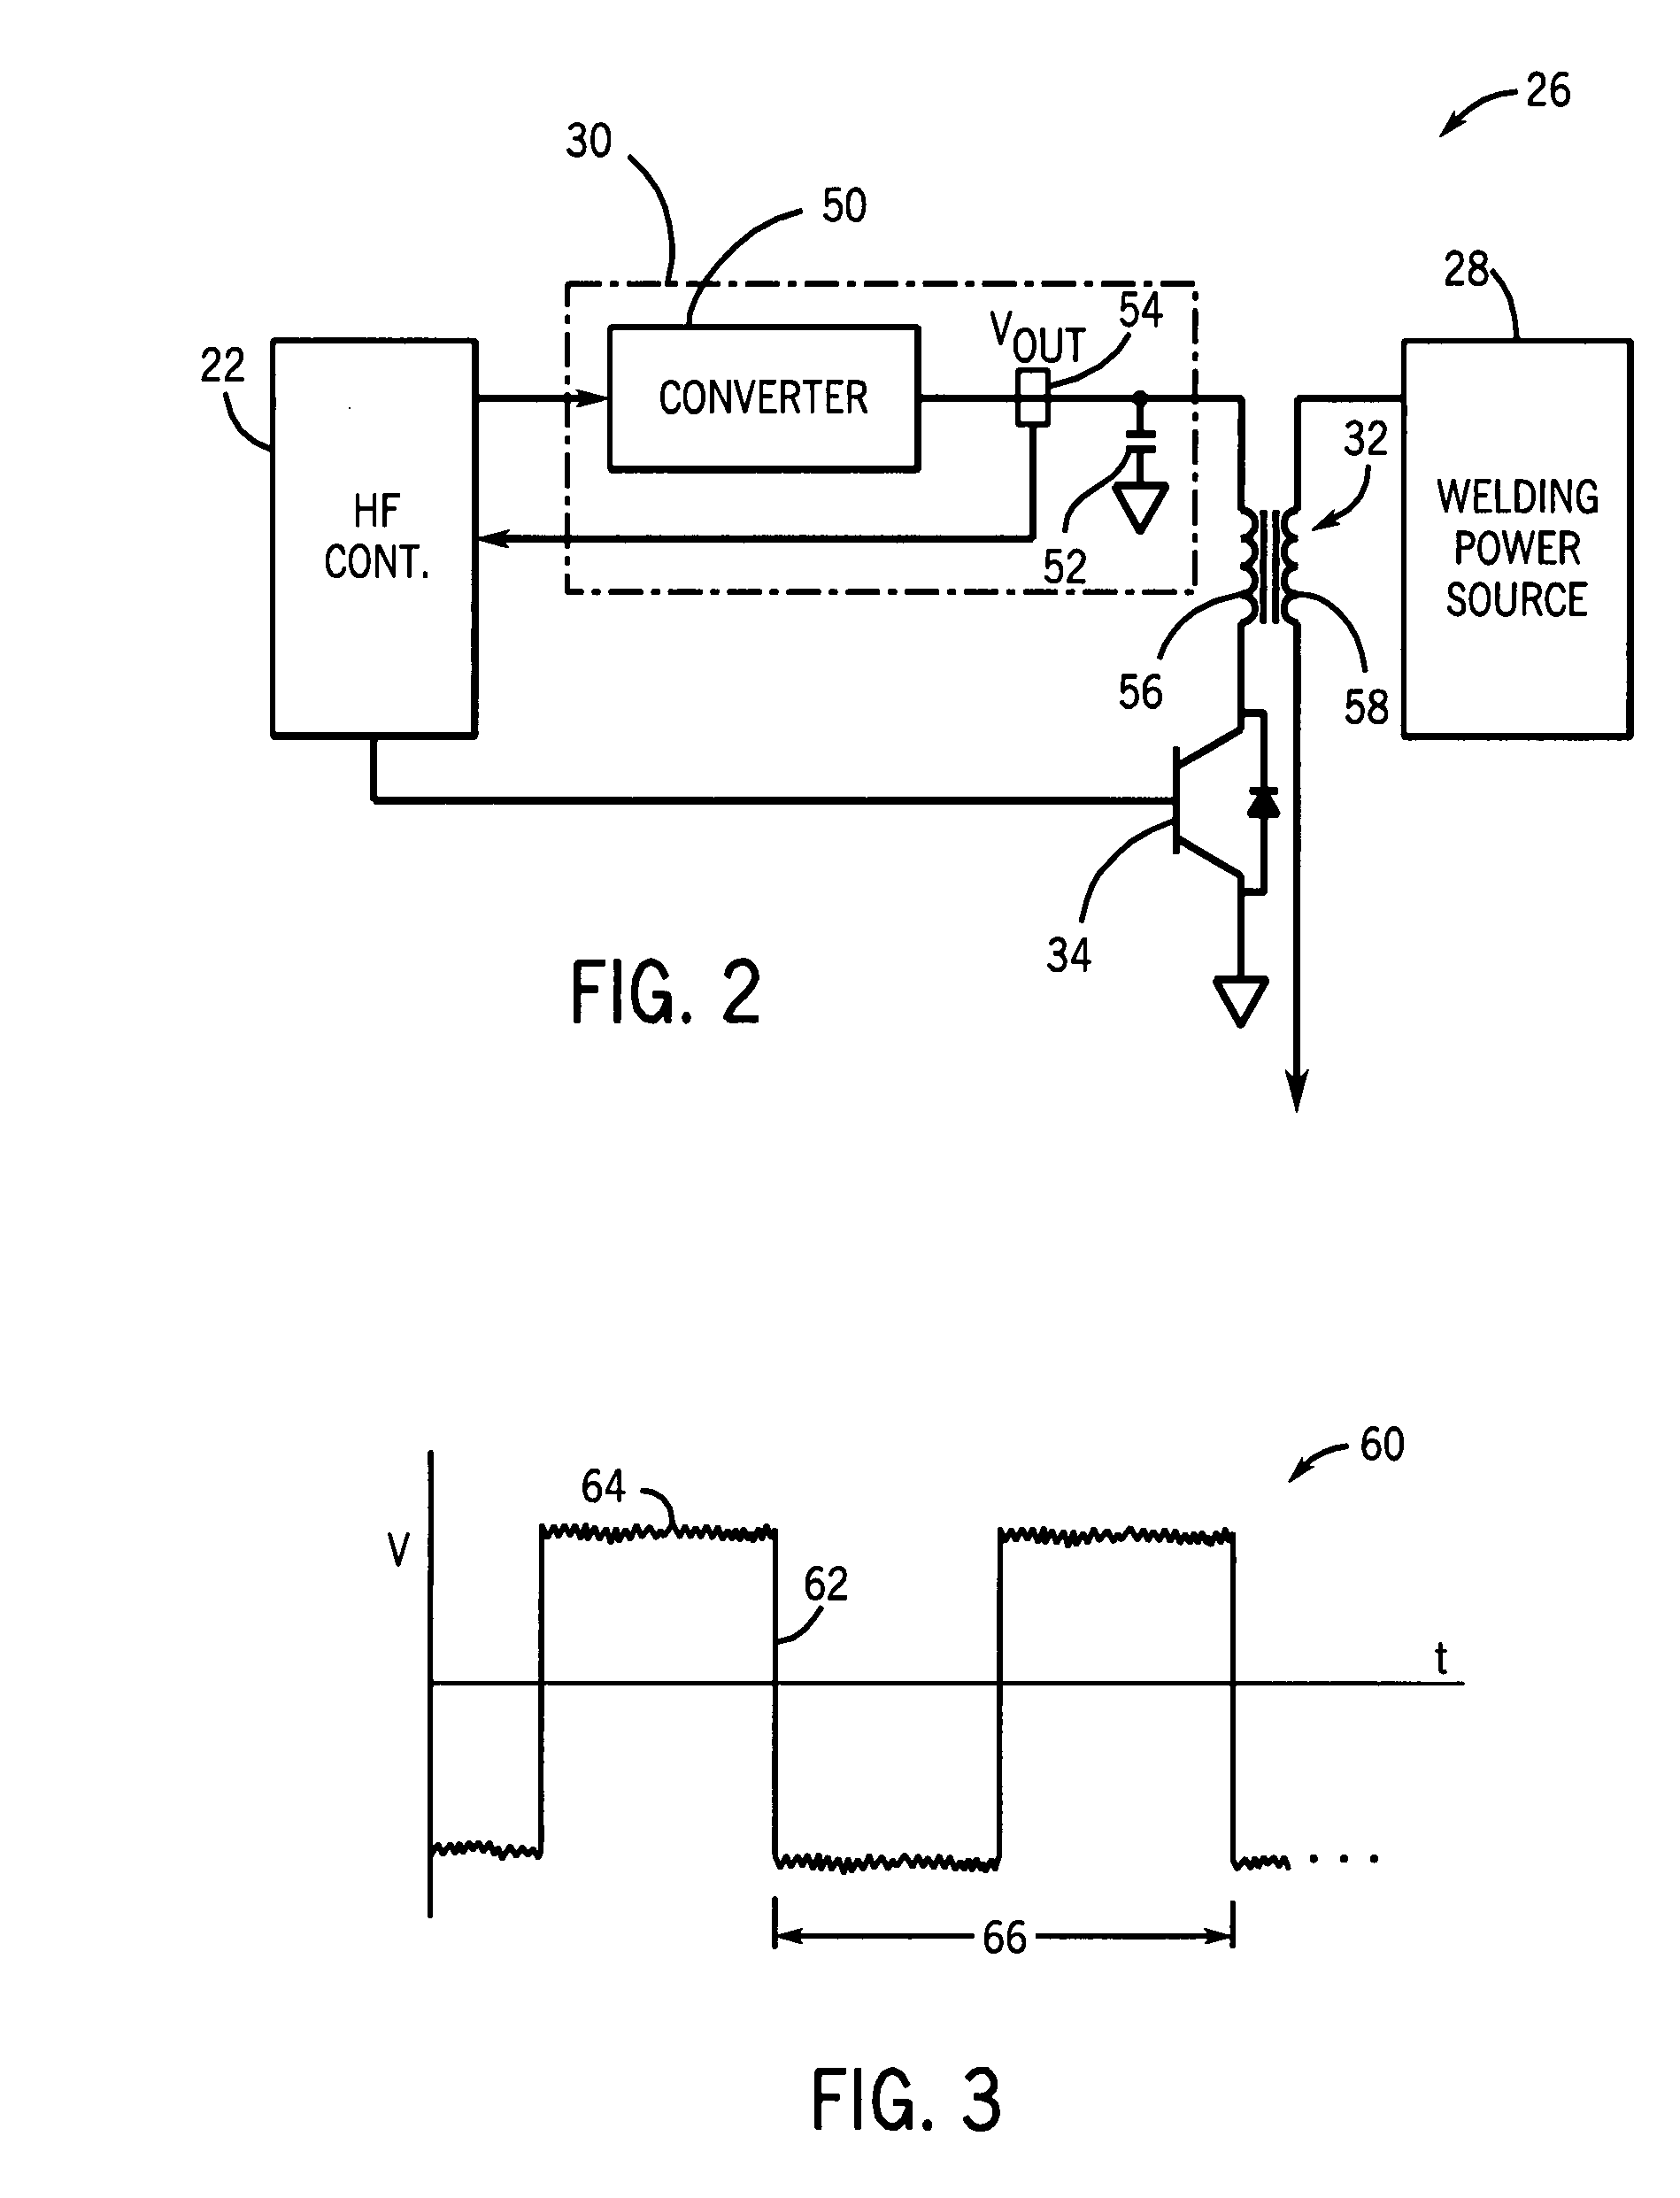 Welding power source with automatic variable high frequency